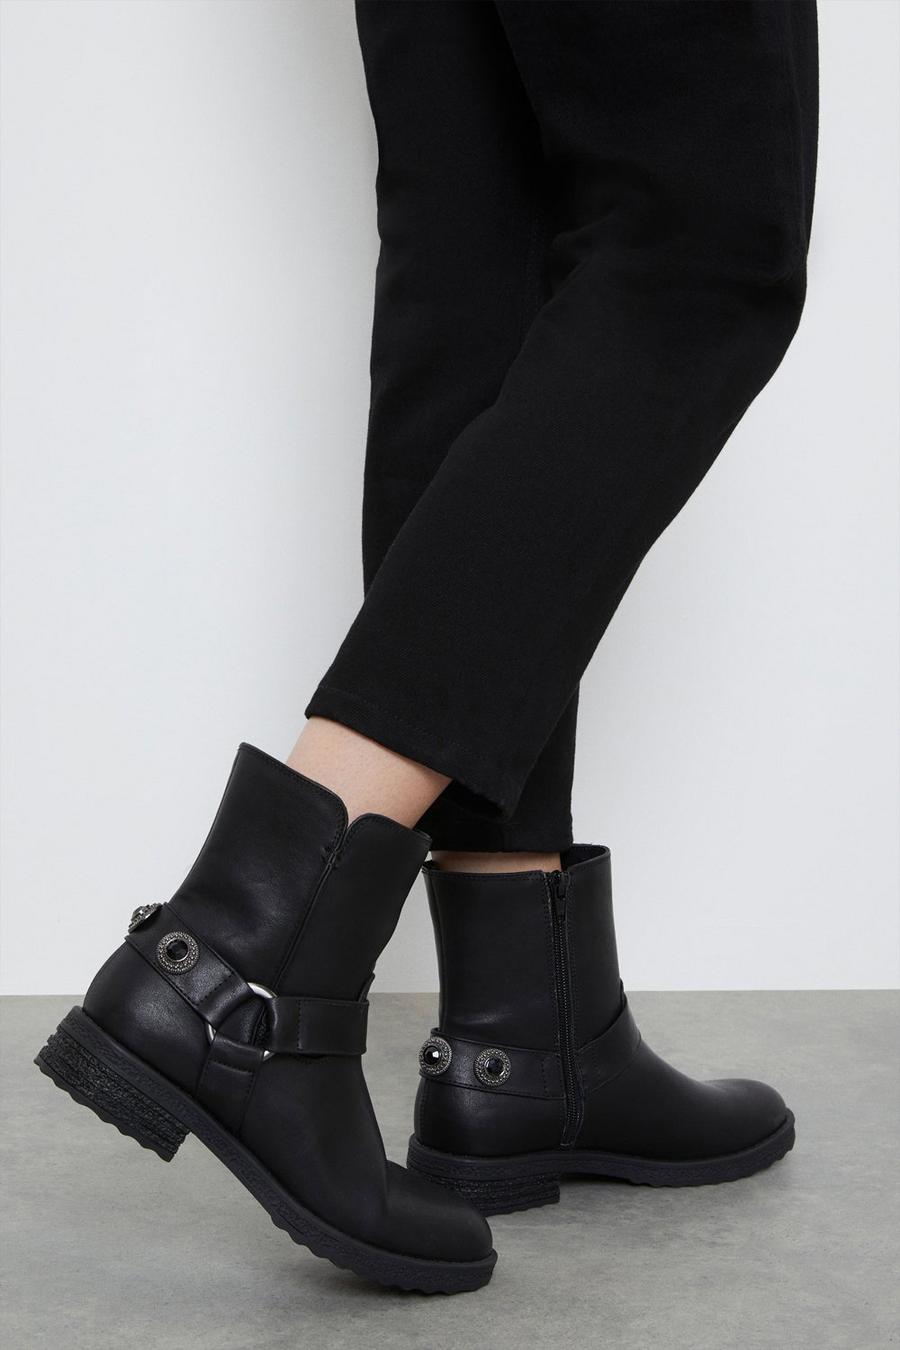 Good For The Sole: Melody Comfort Biker Boot